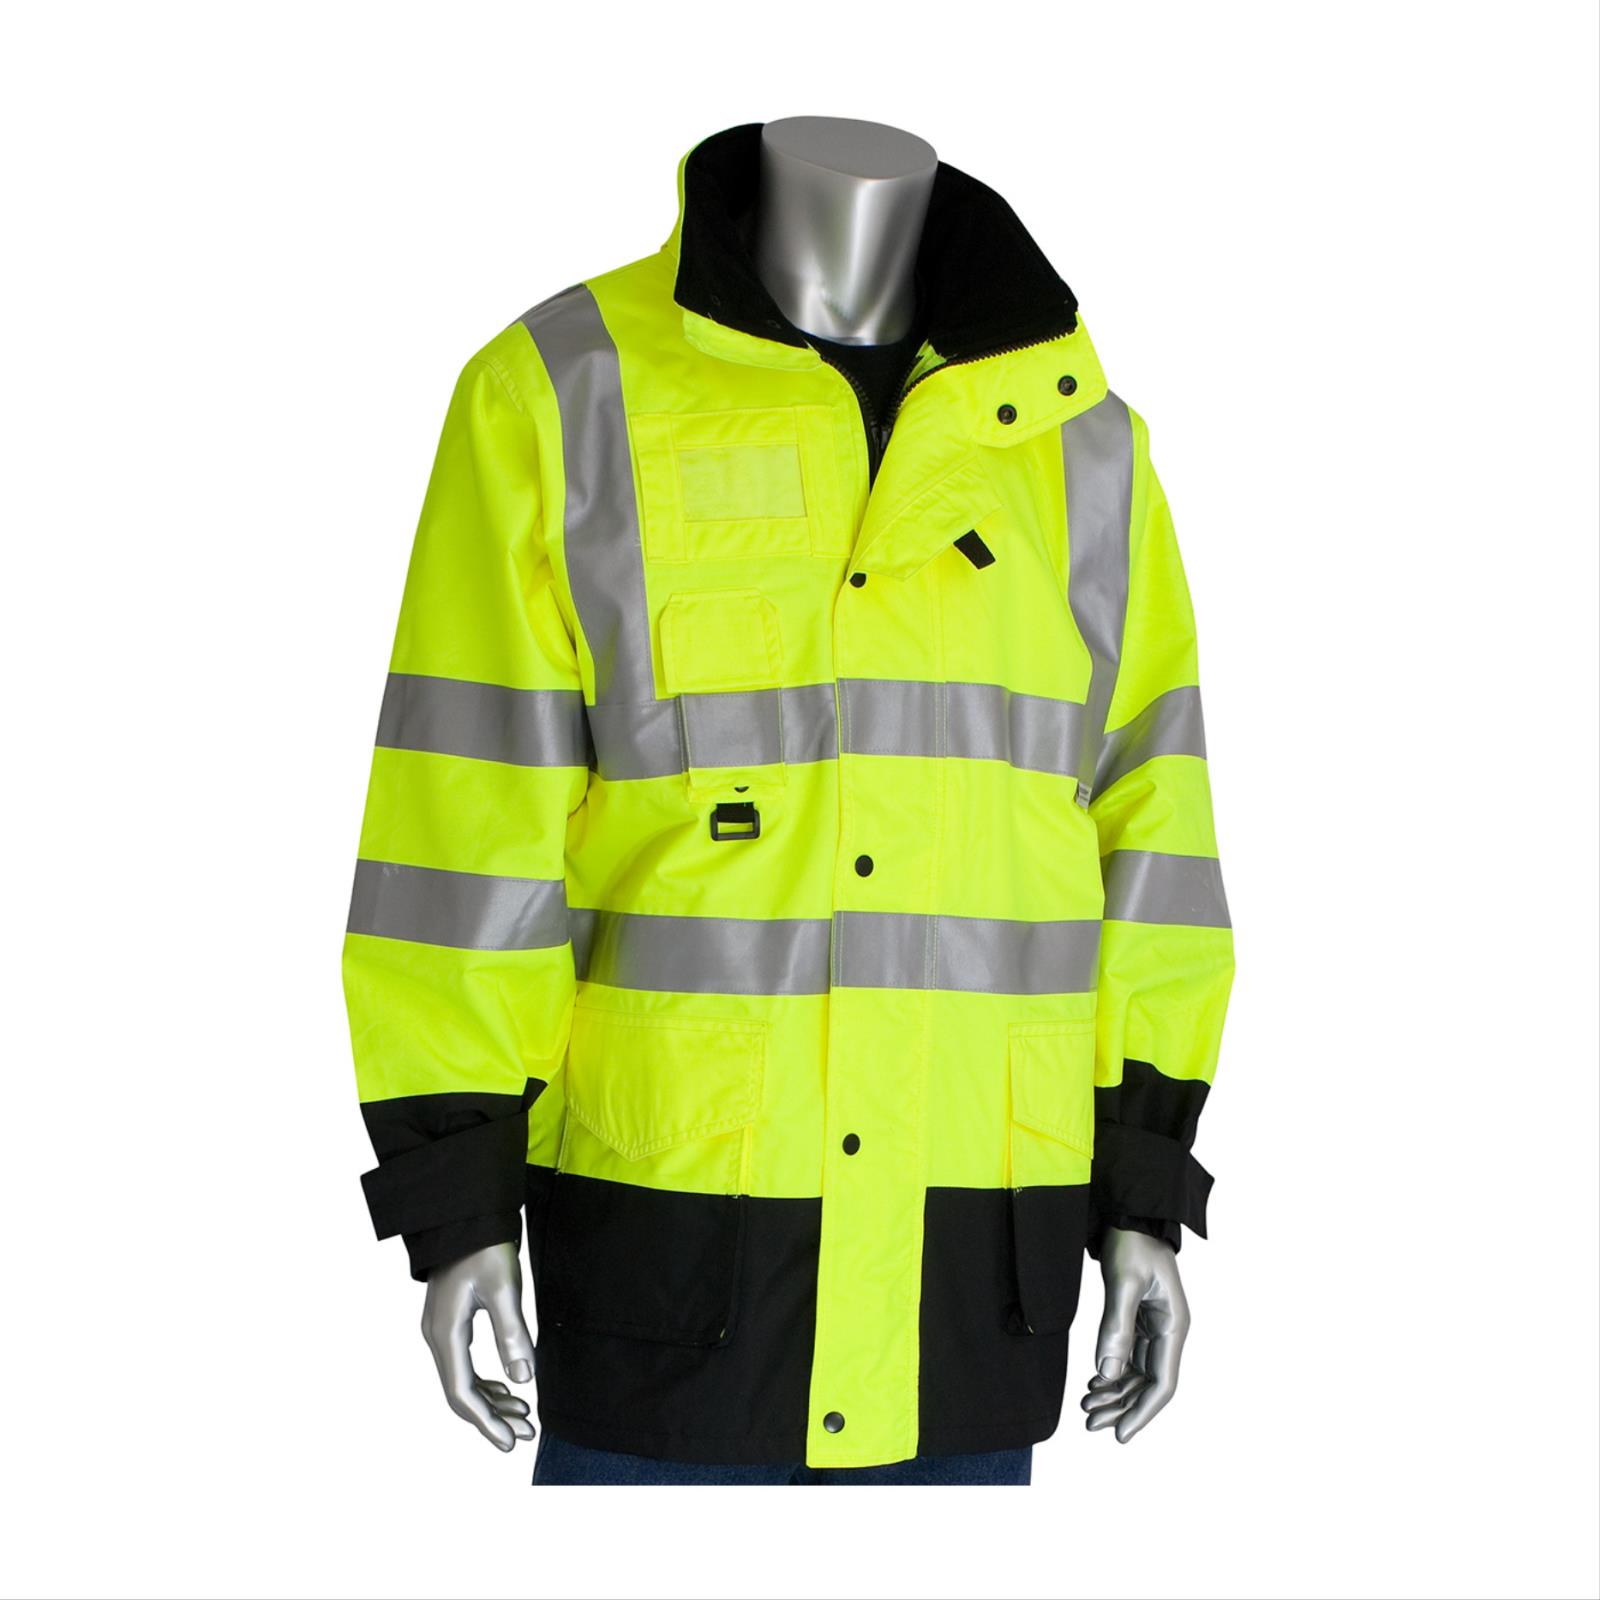 Seven-in-One All Conditions Coat, Class 3 Type R